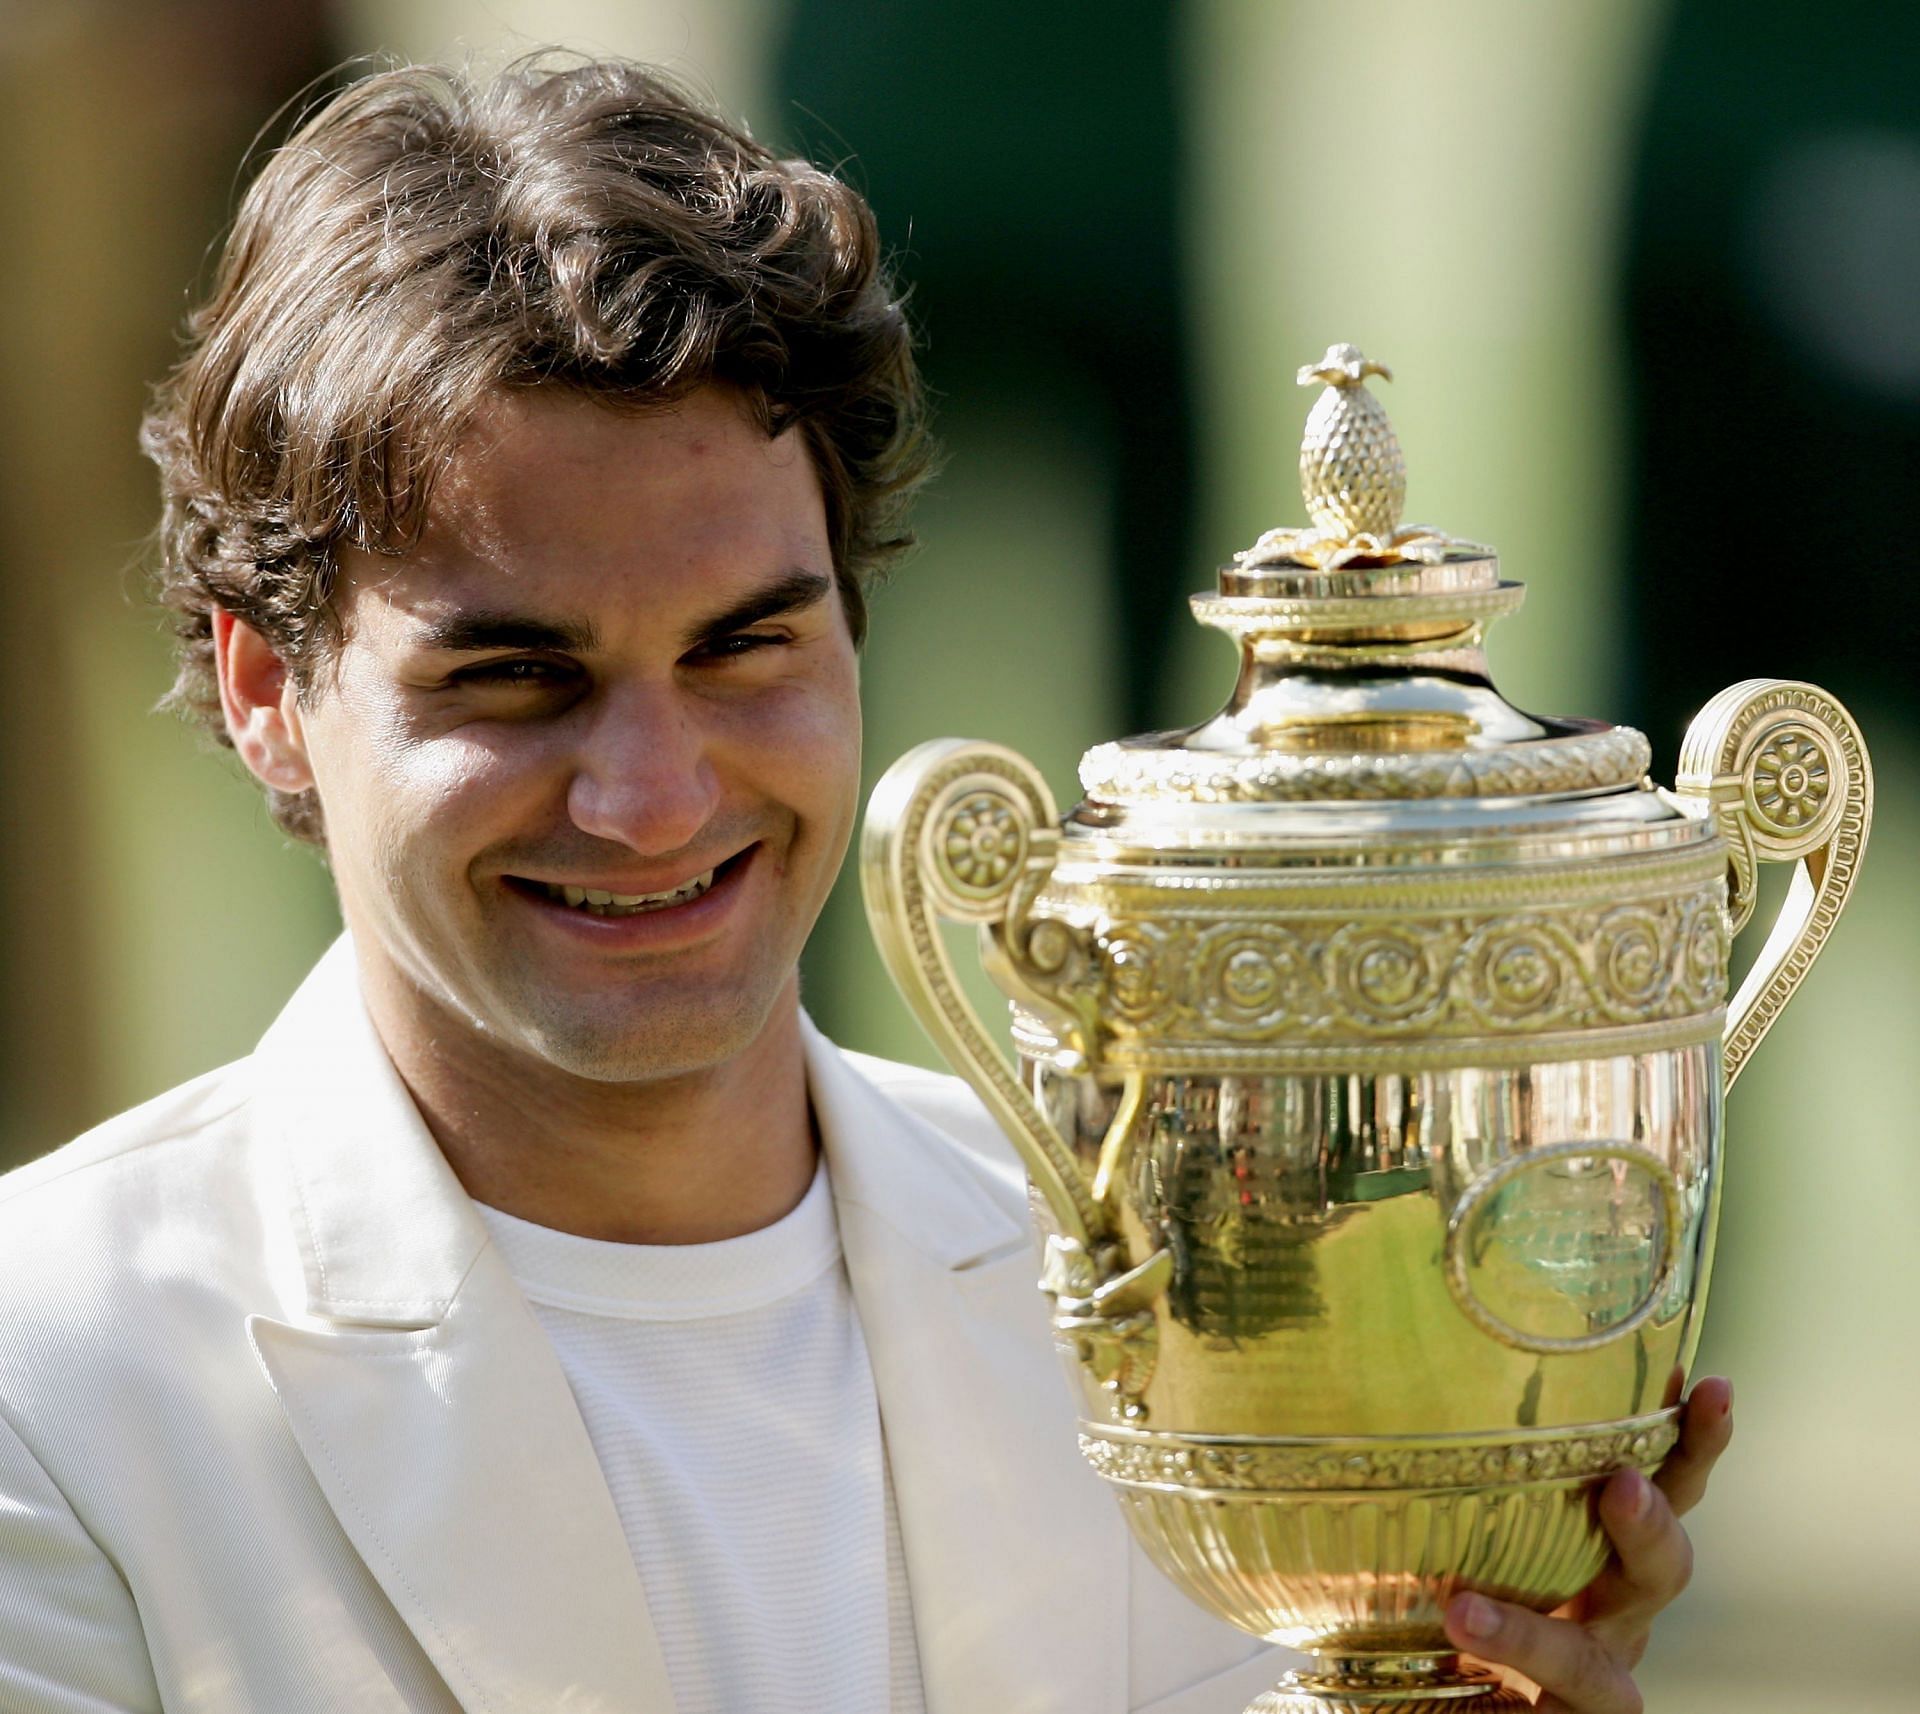 Roger Federer won his fourth-straight Wimbledon title in 2006.